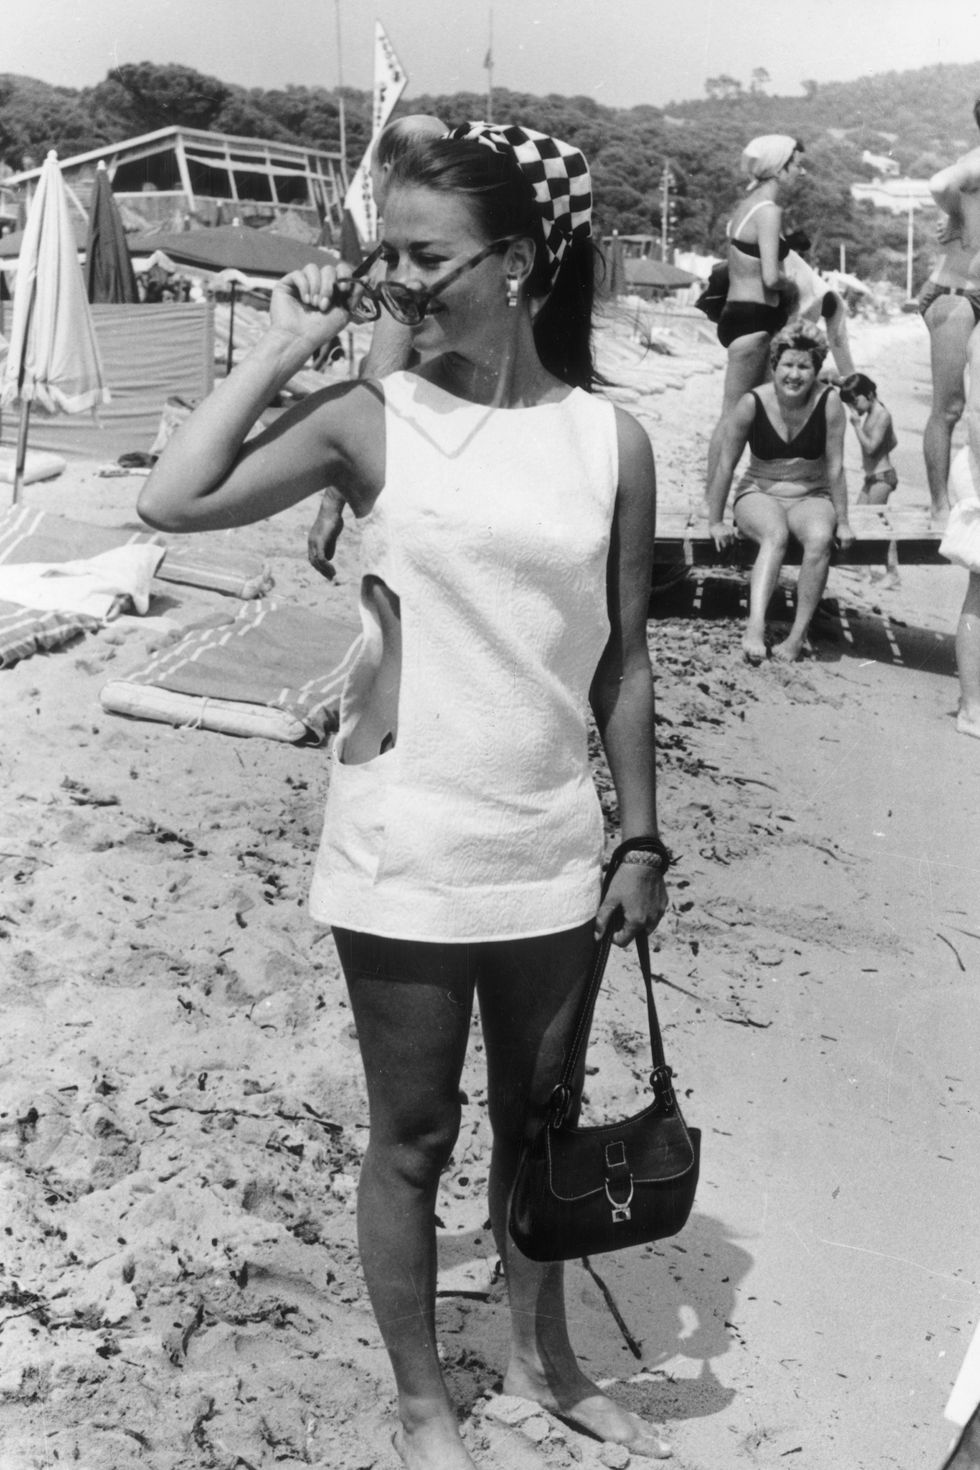 August 1968:  American film star and former child actress, Natalie Wood (1938 - 1981) on the beach in St Tropez.  (Photo by Keystone/Getty Images)